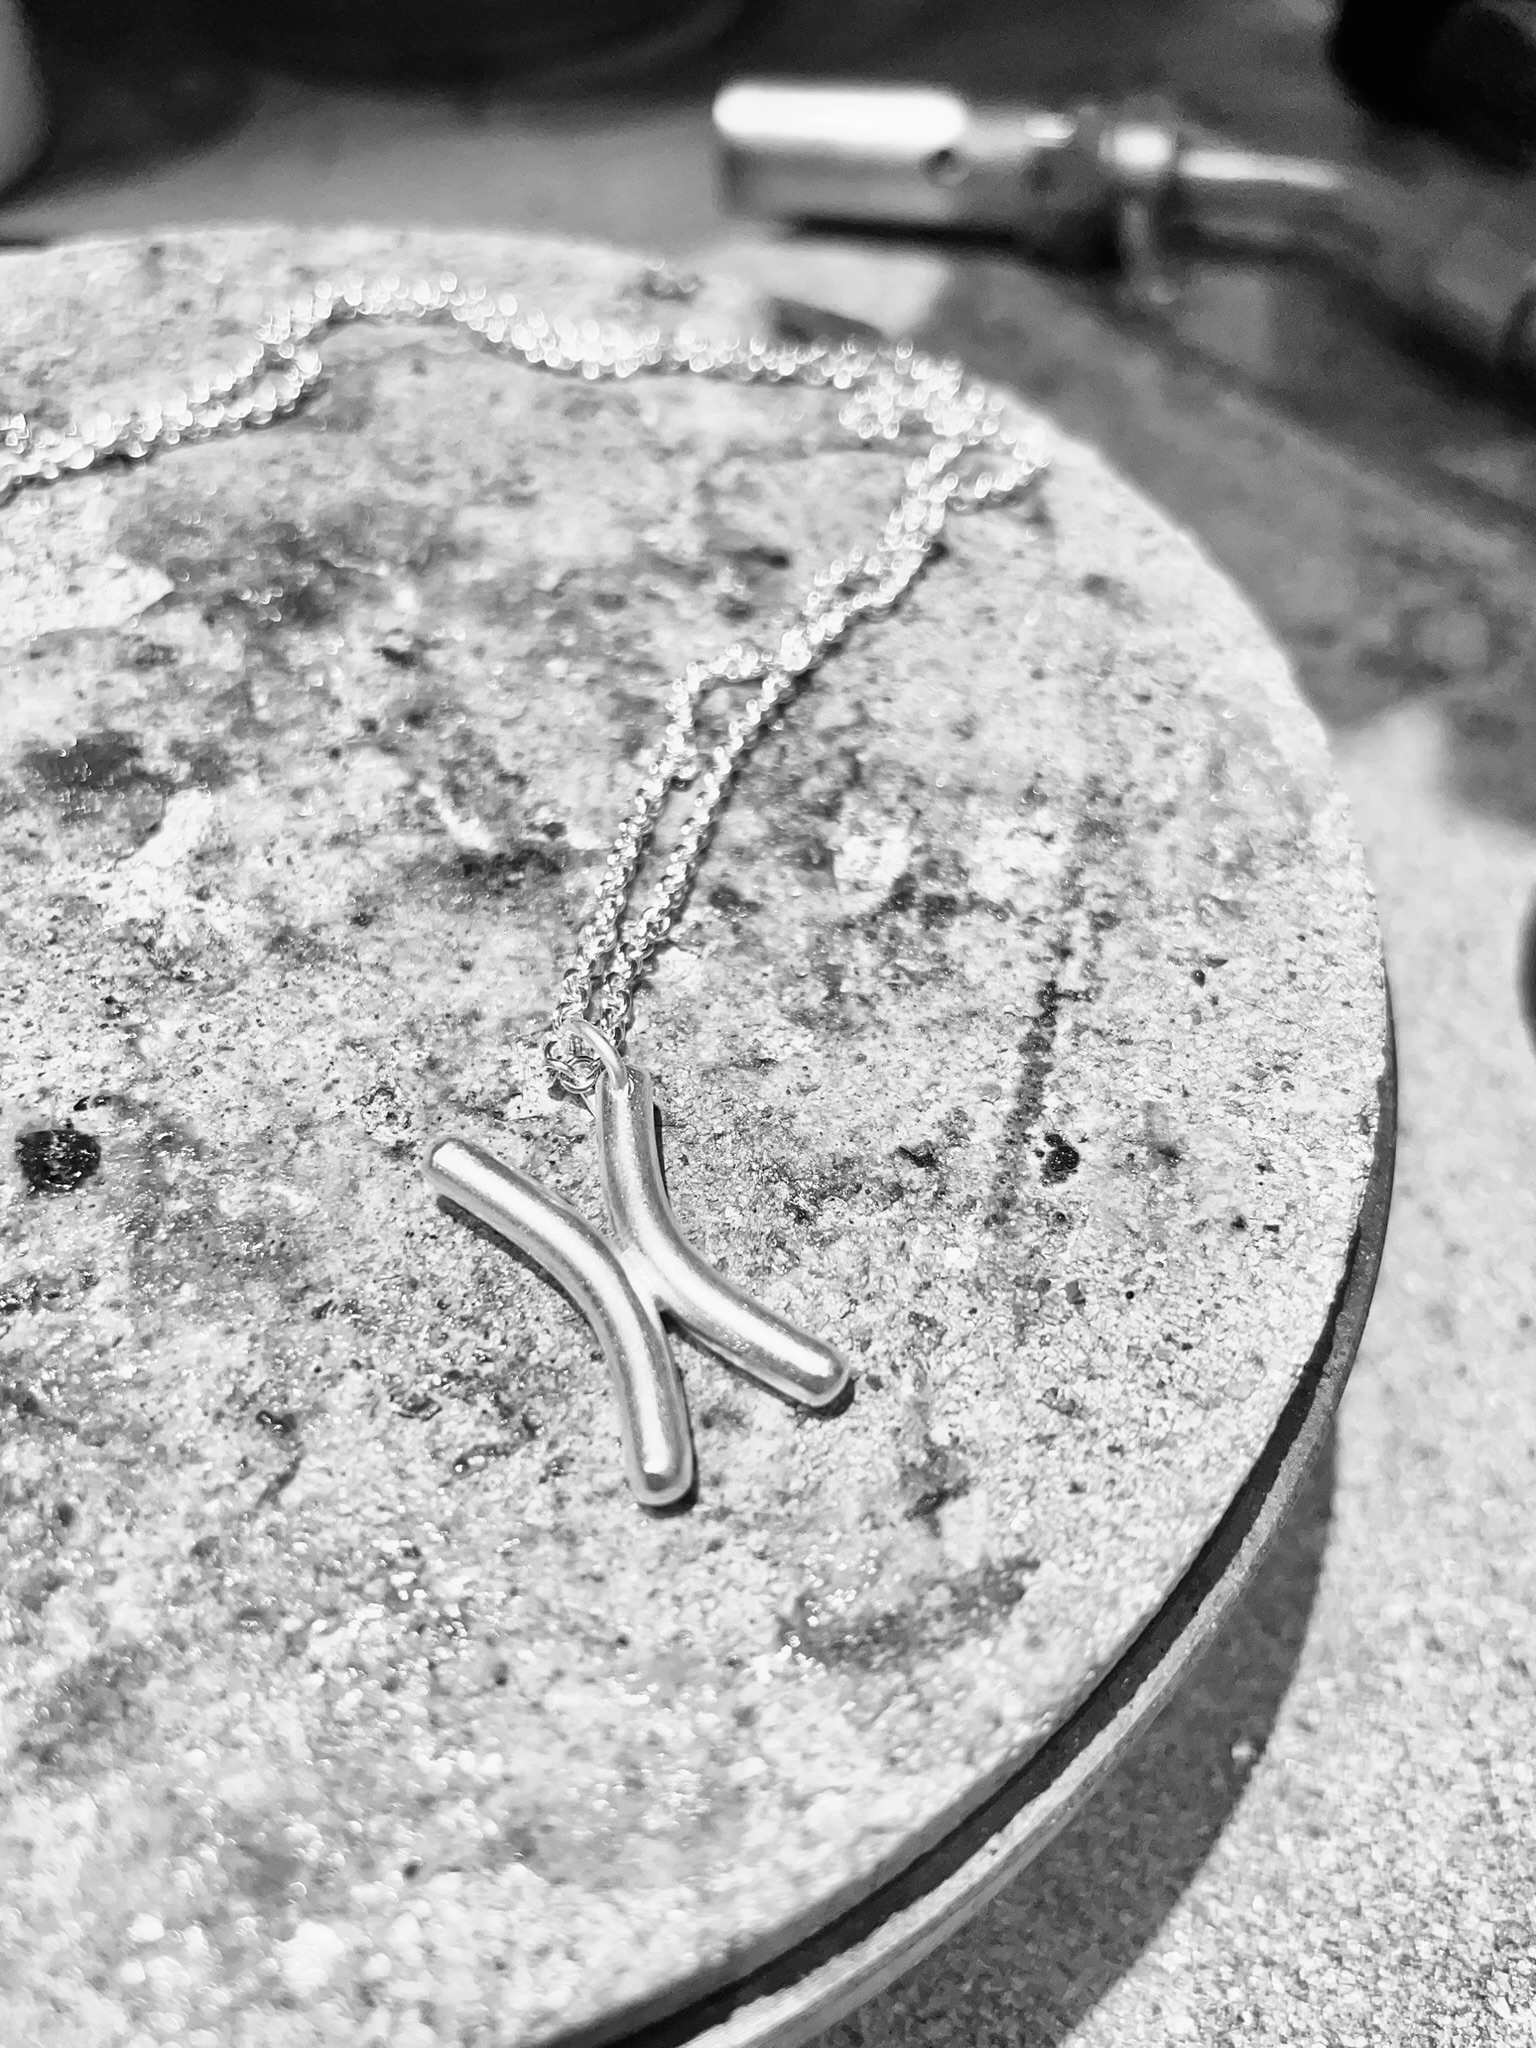 A silver chromosome necklace on a silversmith's bench